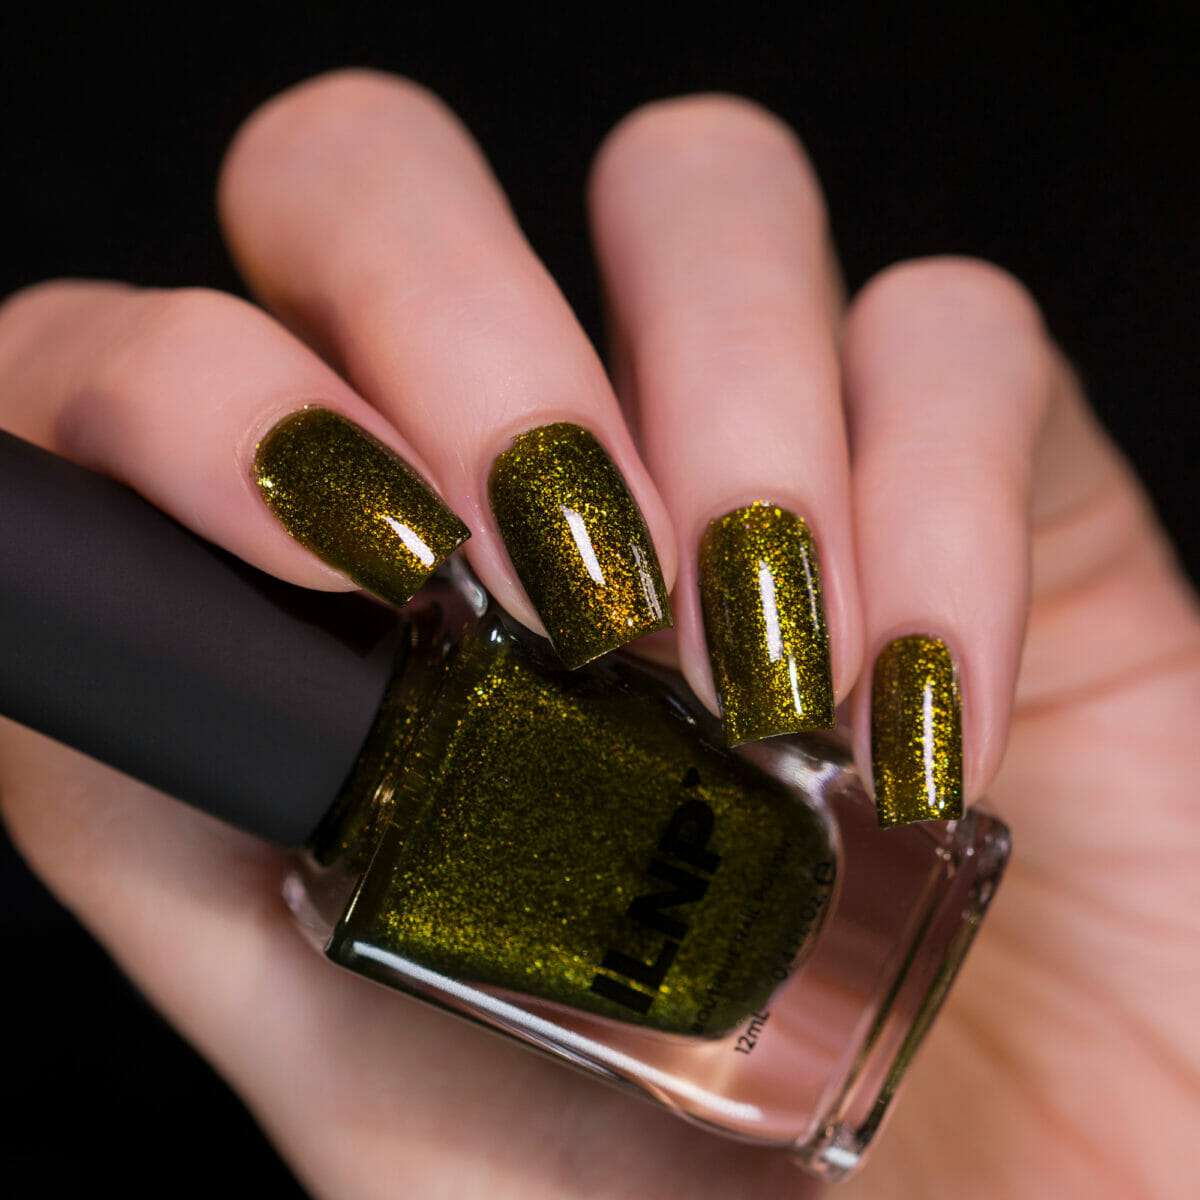 Olive Grove - Rustic Army Green Shimmer Nail Polish by ILNP